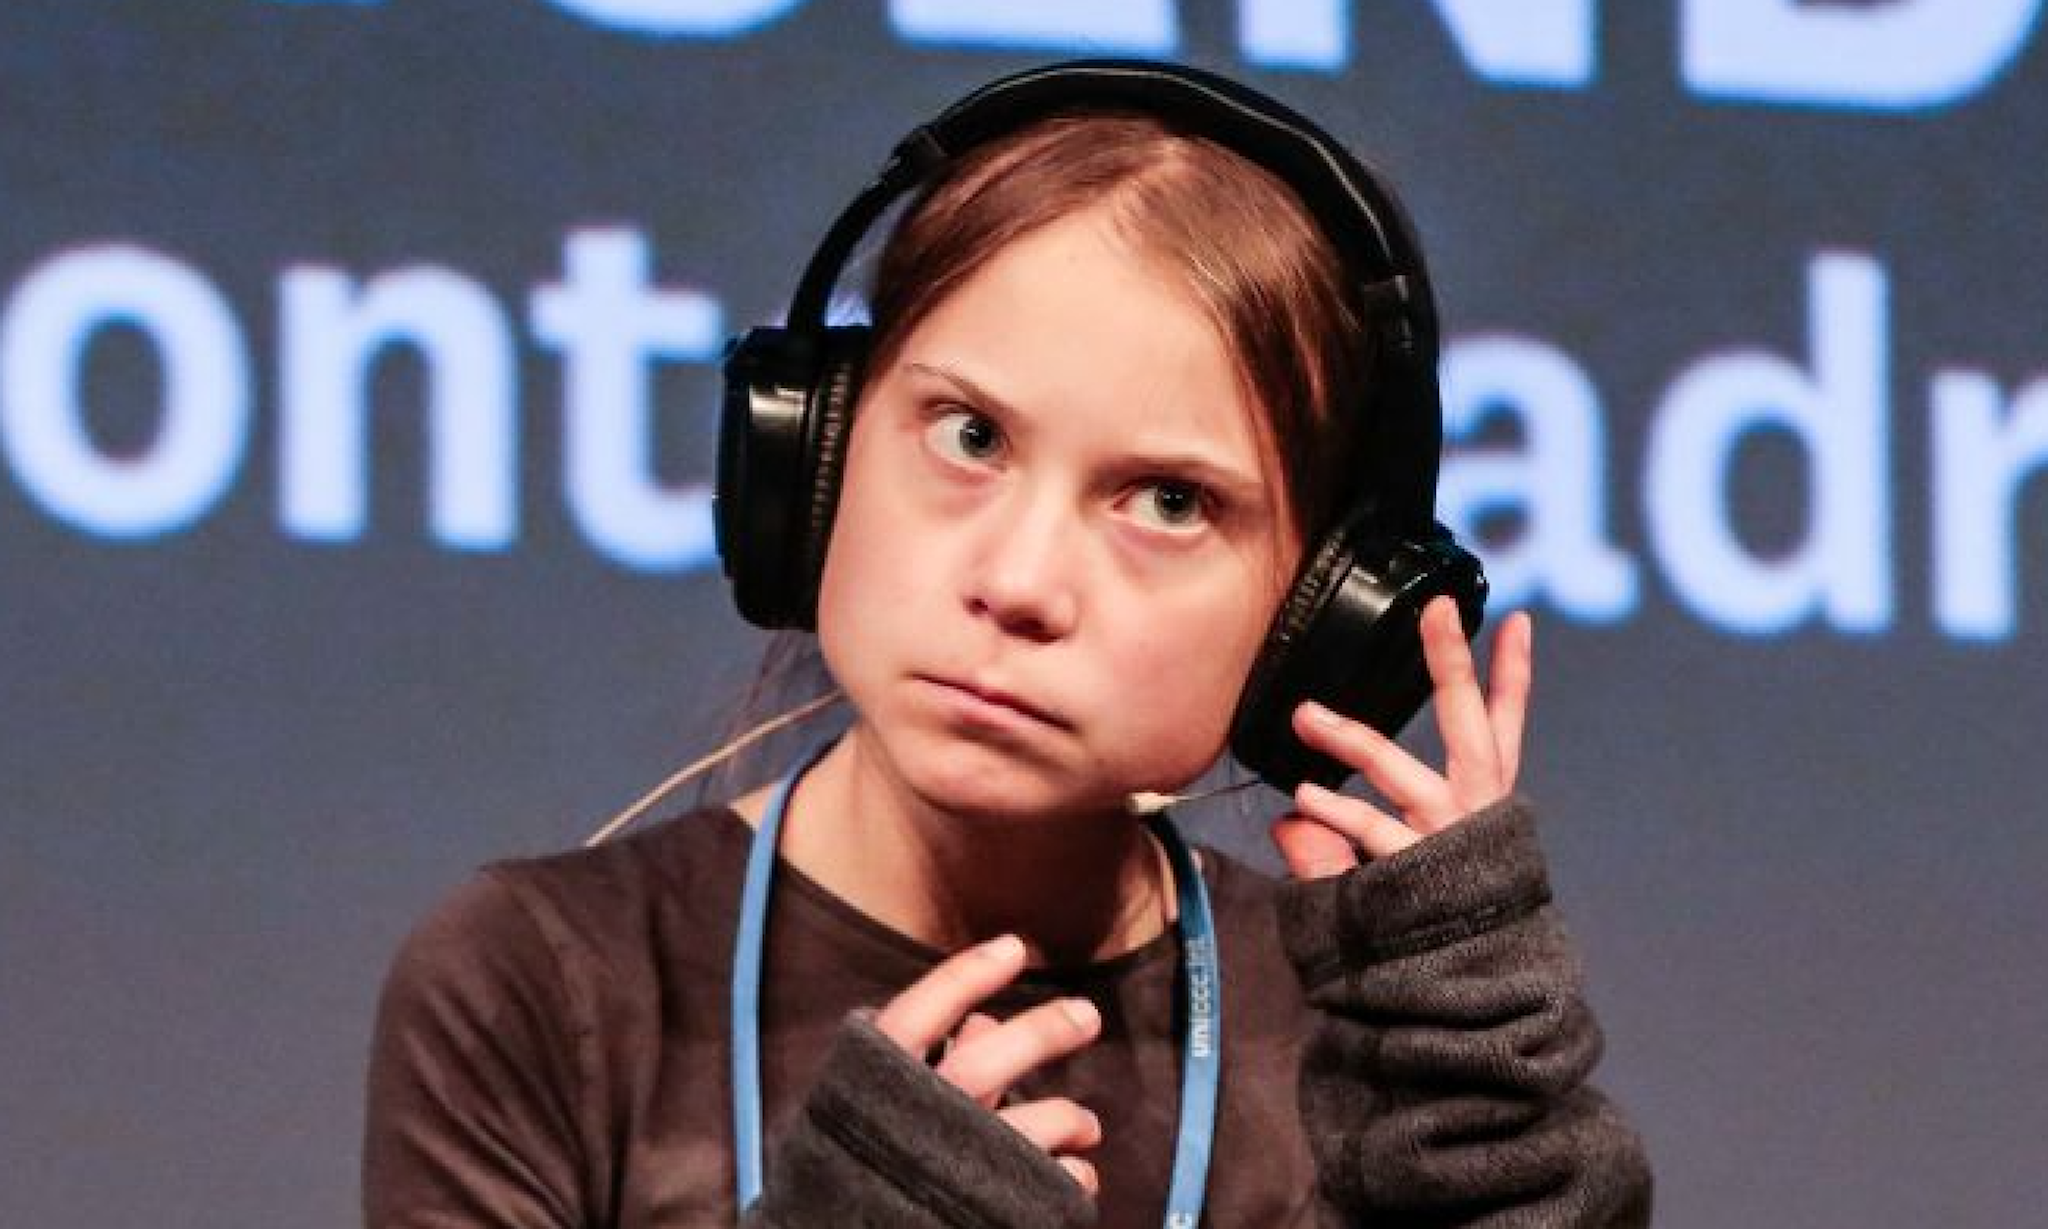 Swedish Climate activist Greta Thunberg attends the Youth Climate-Fridays press conference at La Casa Encendida on December 6, 2019 in Madrid, Spain.